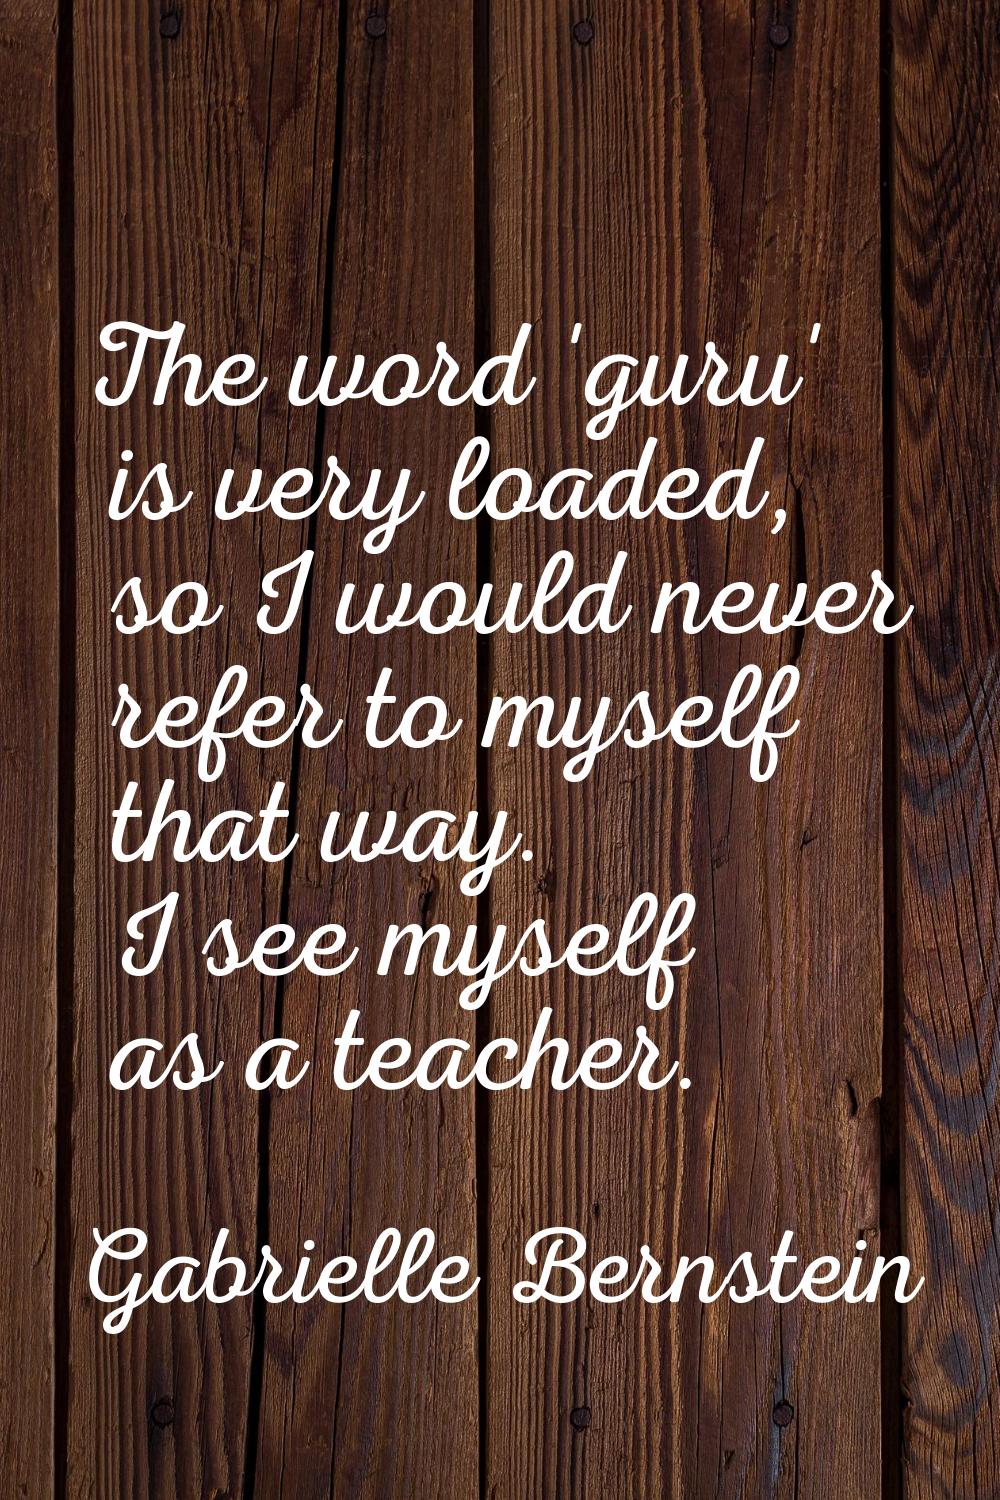 The word 'guru' is very loaded, so I would never refer to myself that way. I see myself as a teache